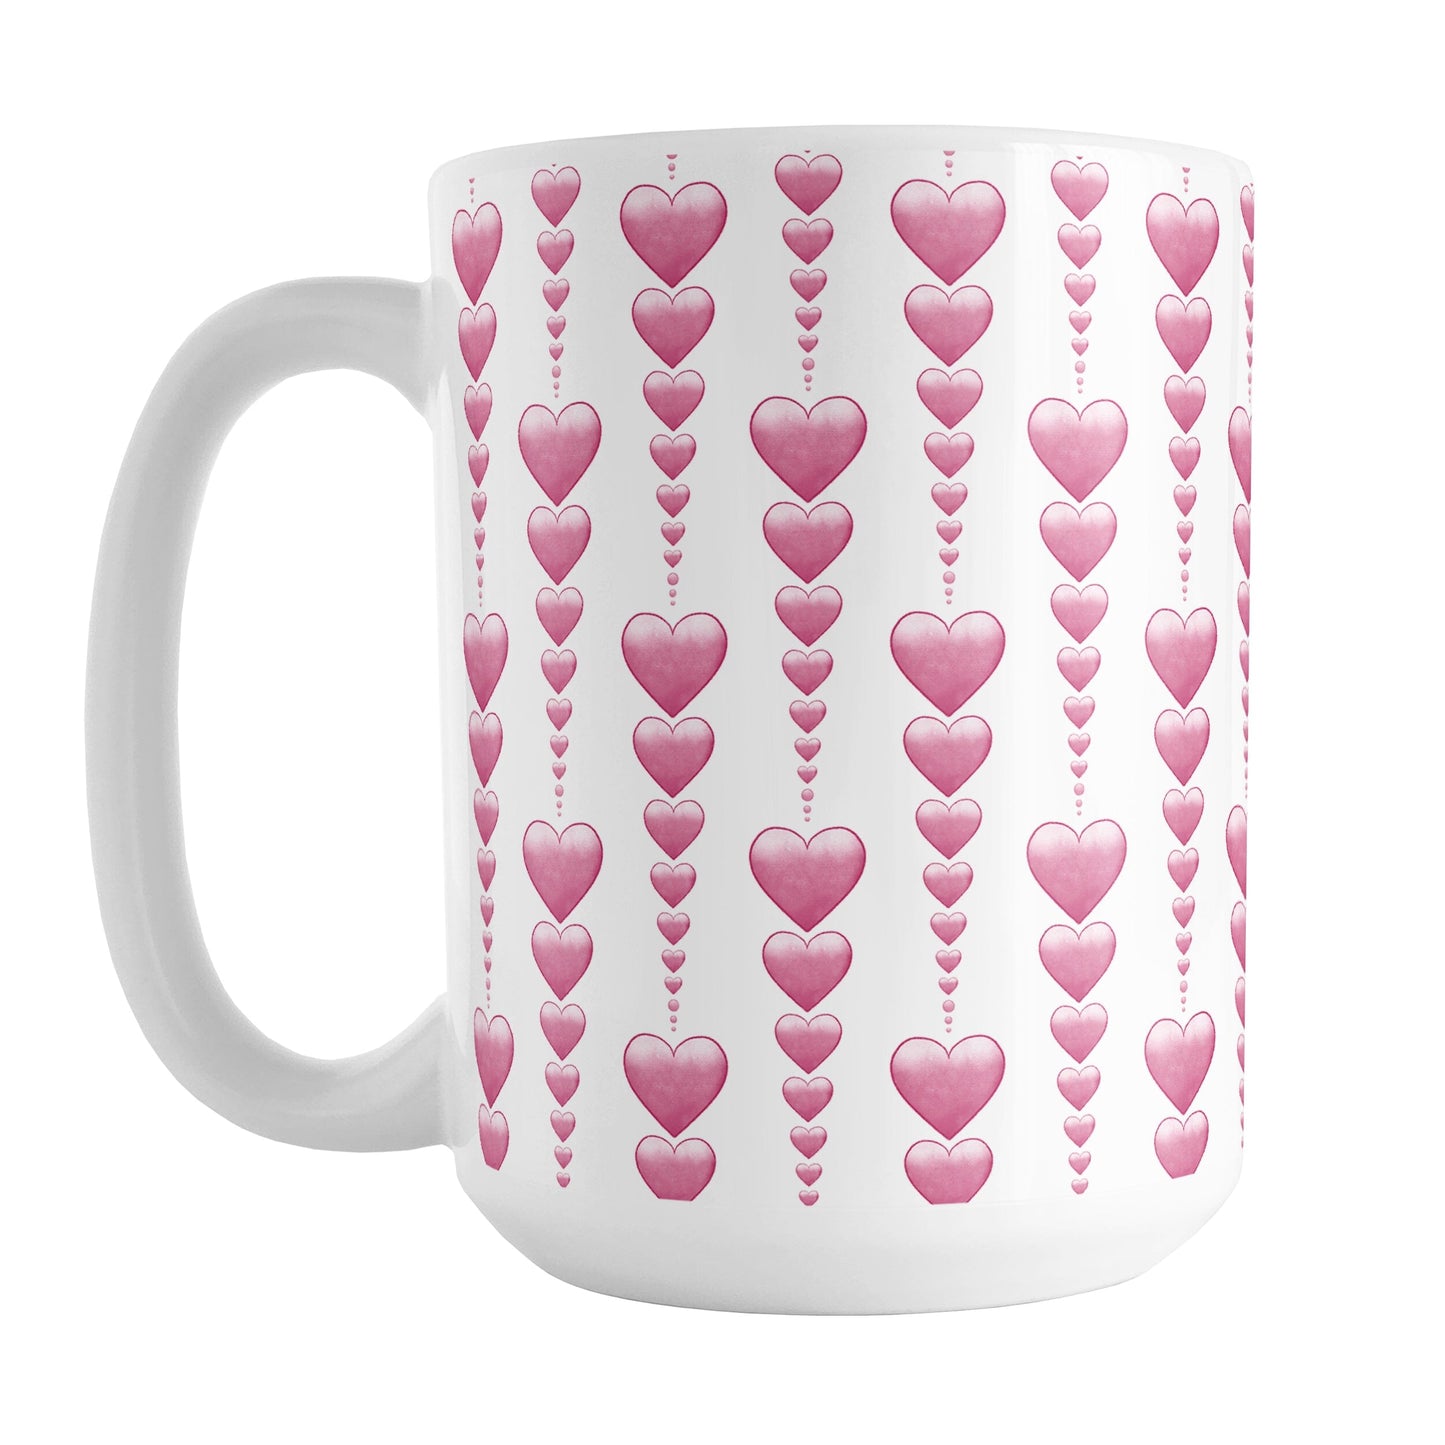 Heart Strings Mug (15oz) at Amy's Coffee Mugs. A ceramic coffee mug designed with strings of hearts descending in size in a pattern that wraps around the mug to the handle.